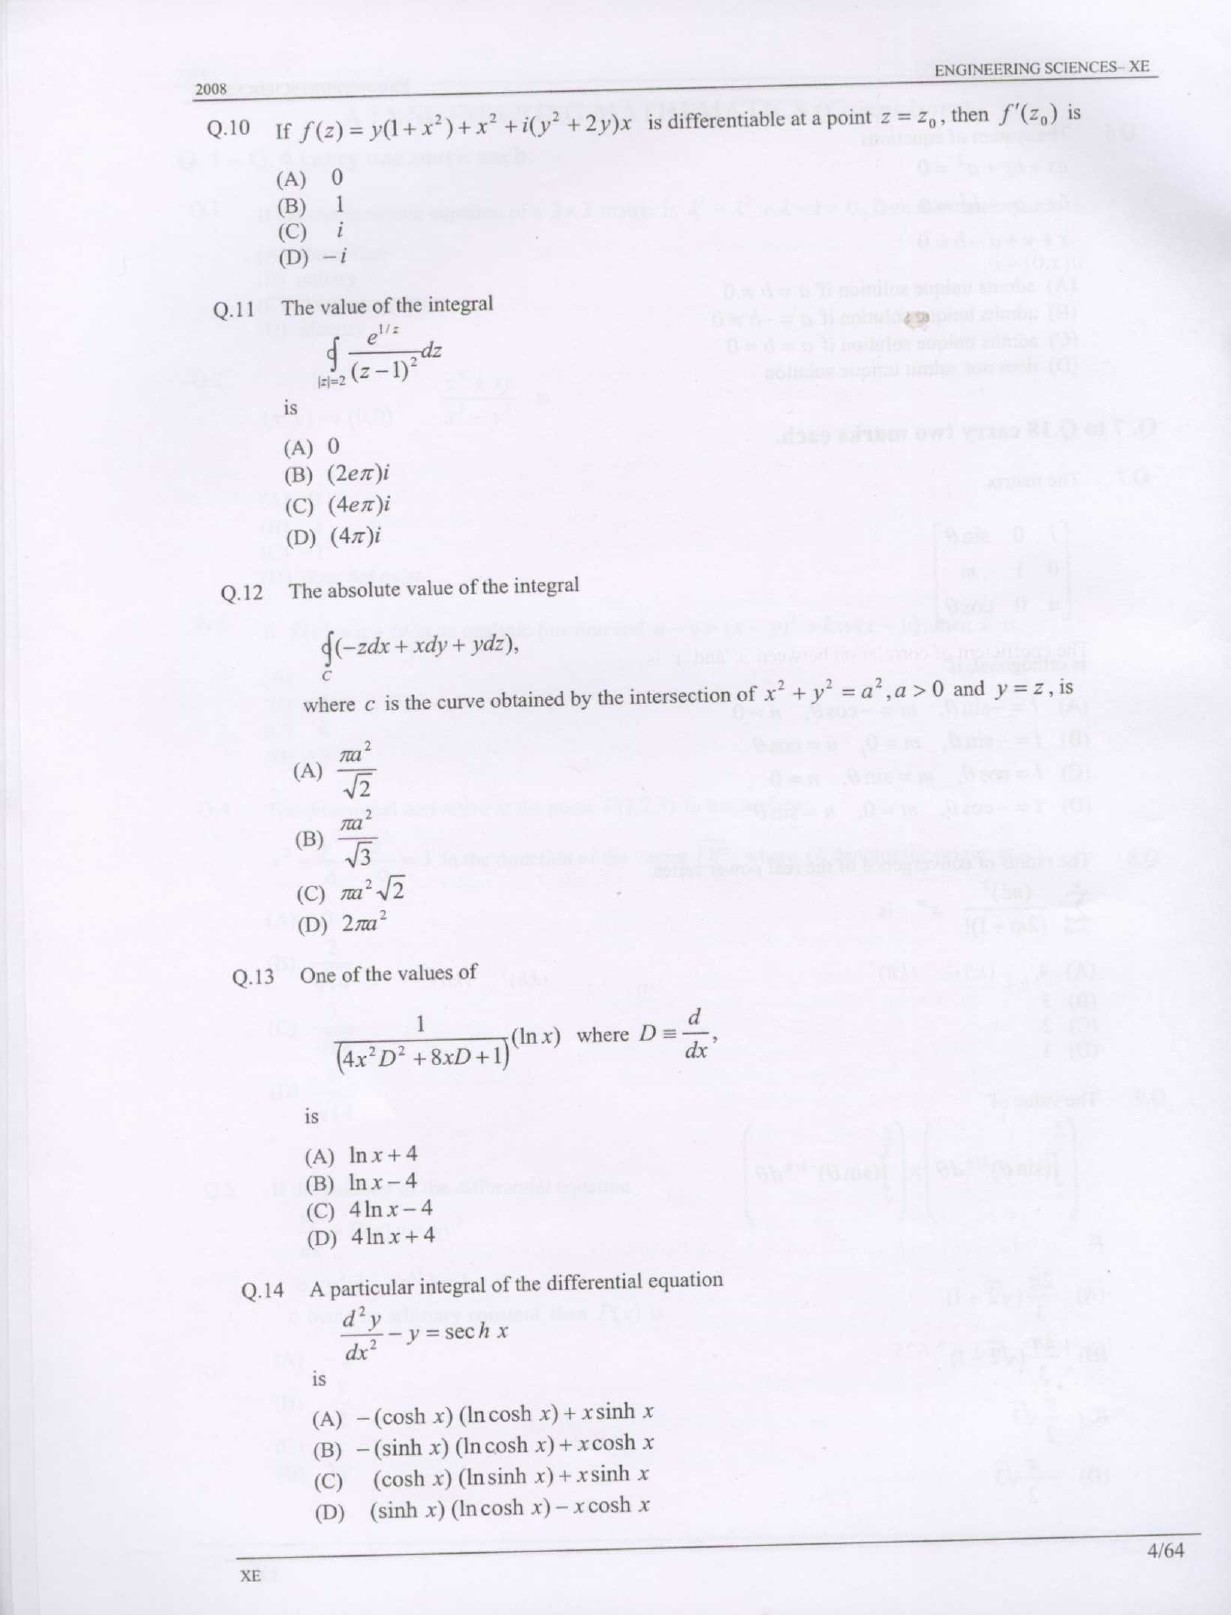 GATE Exam Question Paper 2008 Engineering Sciences 4